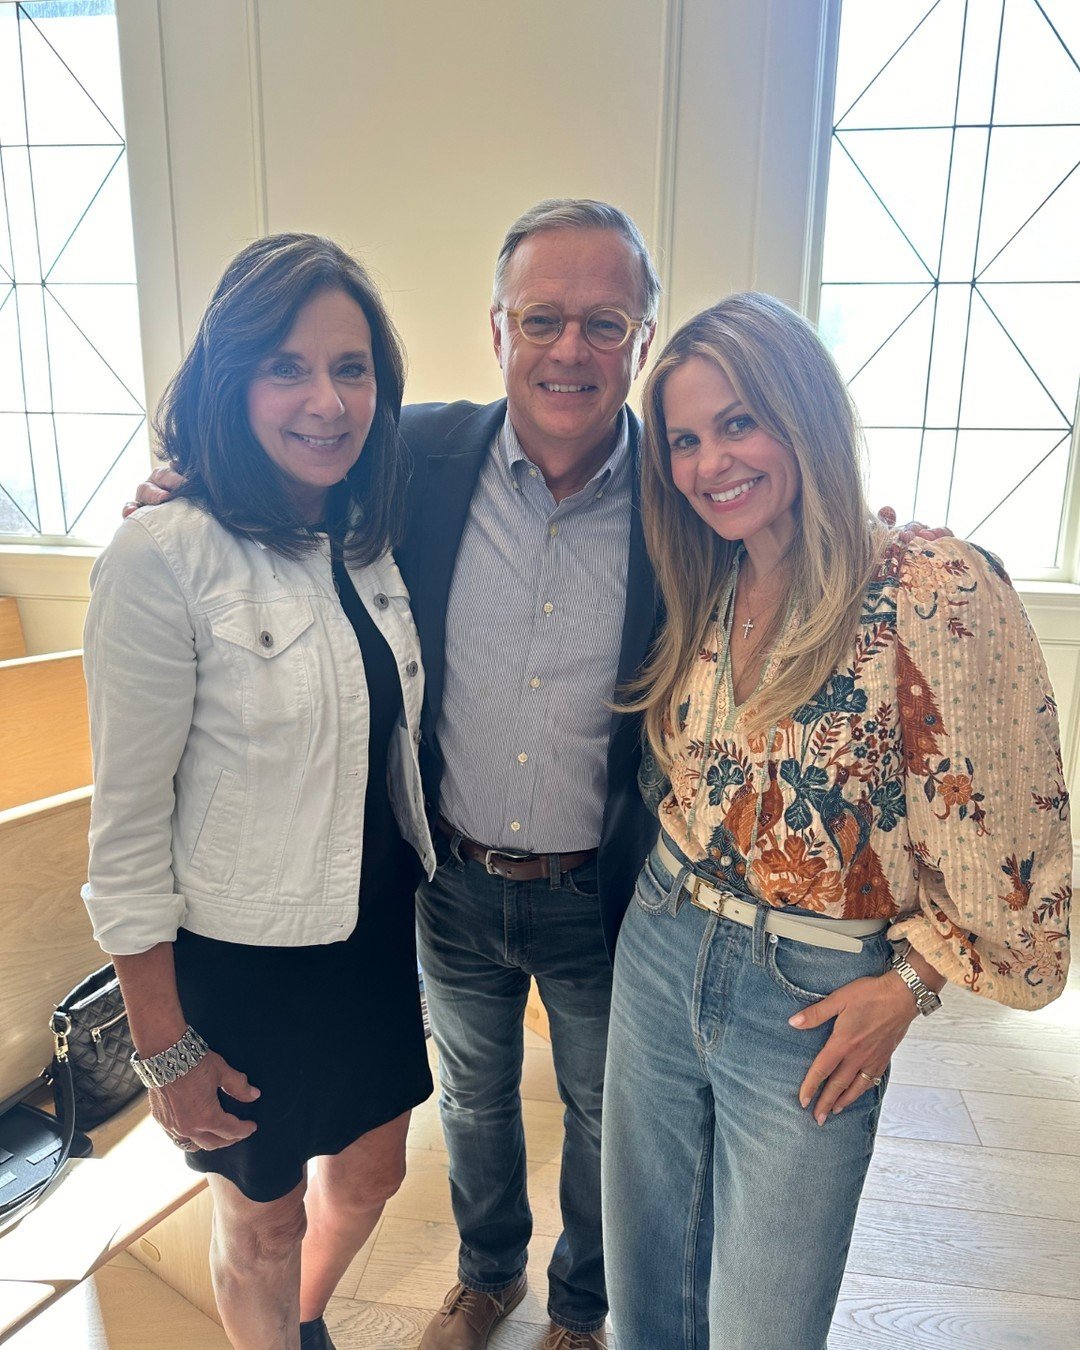 Rozanne and I crossed paths with @candacecbure over the weekend at a worship service in Napa. It was great chatting briefly about The Joy Challenge. Candace was an early reviewer, and I'm grateful for her feedback! 

&quot;When is the last time you r